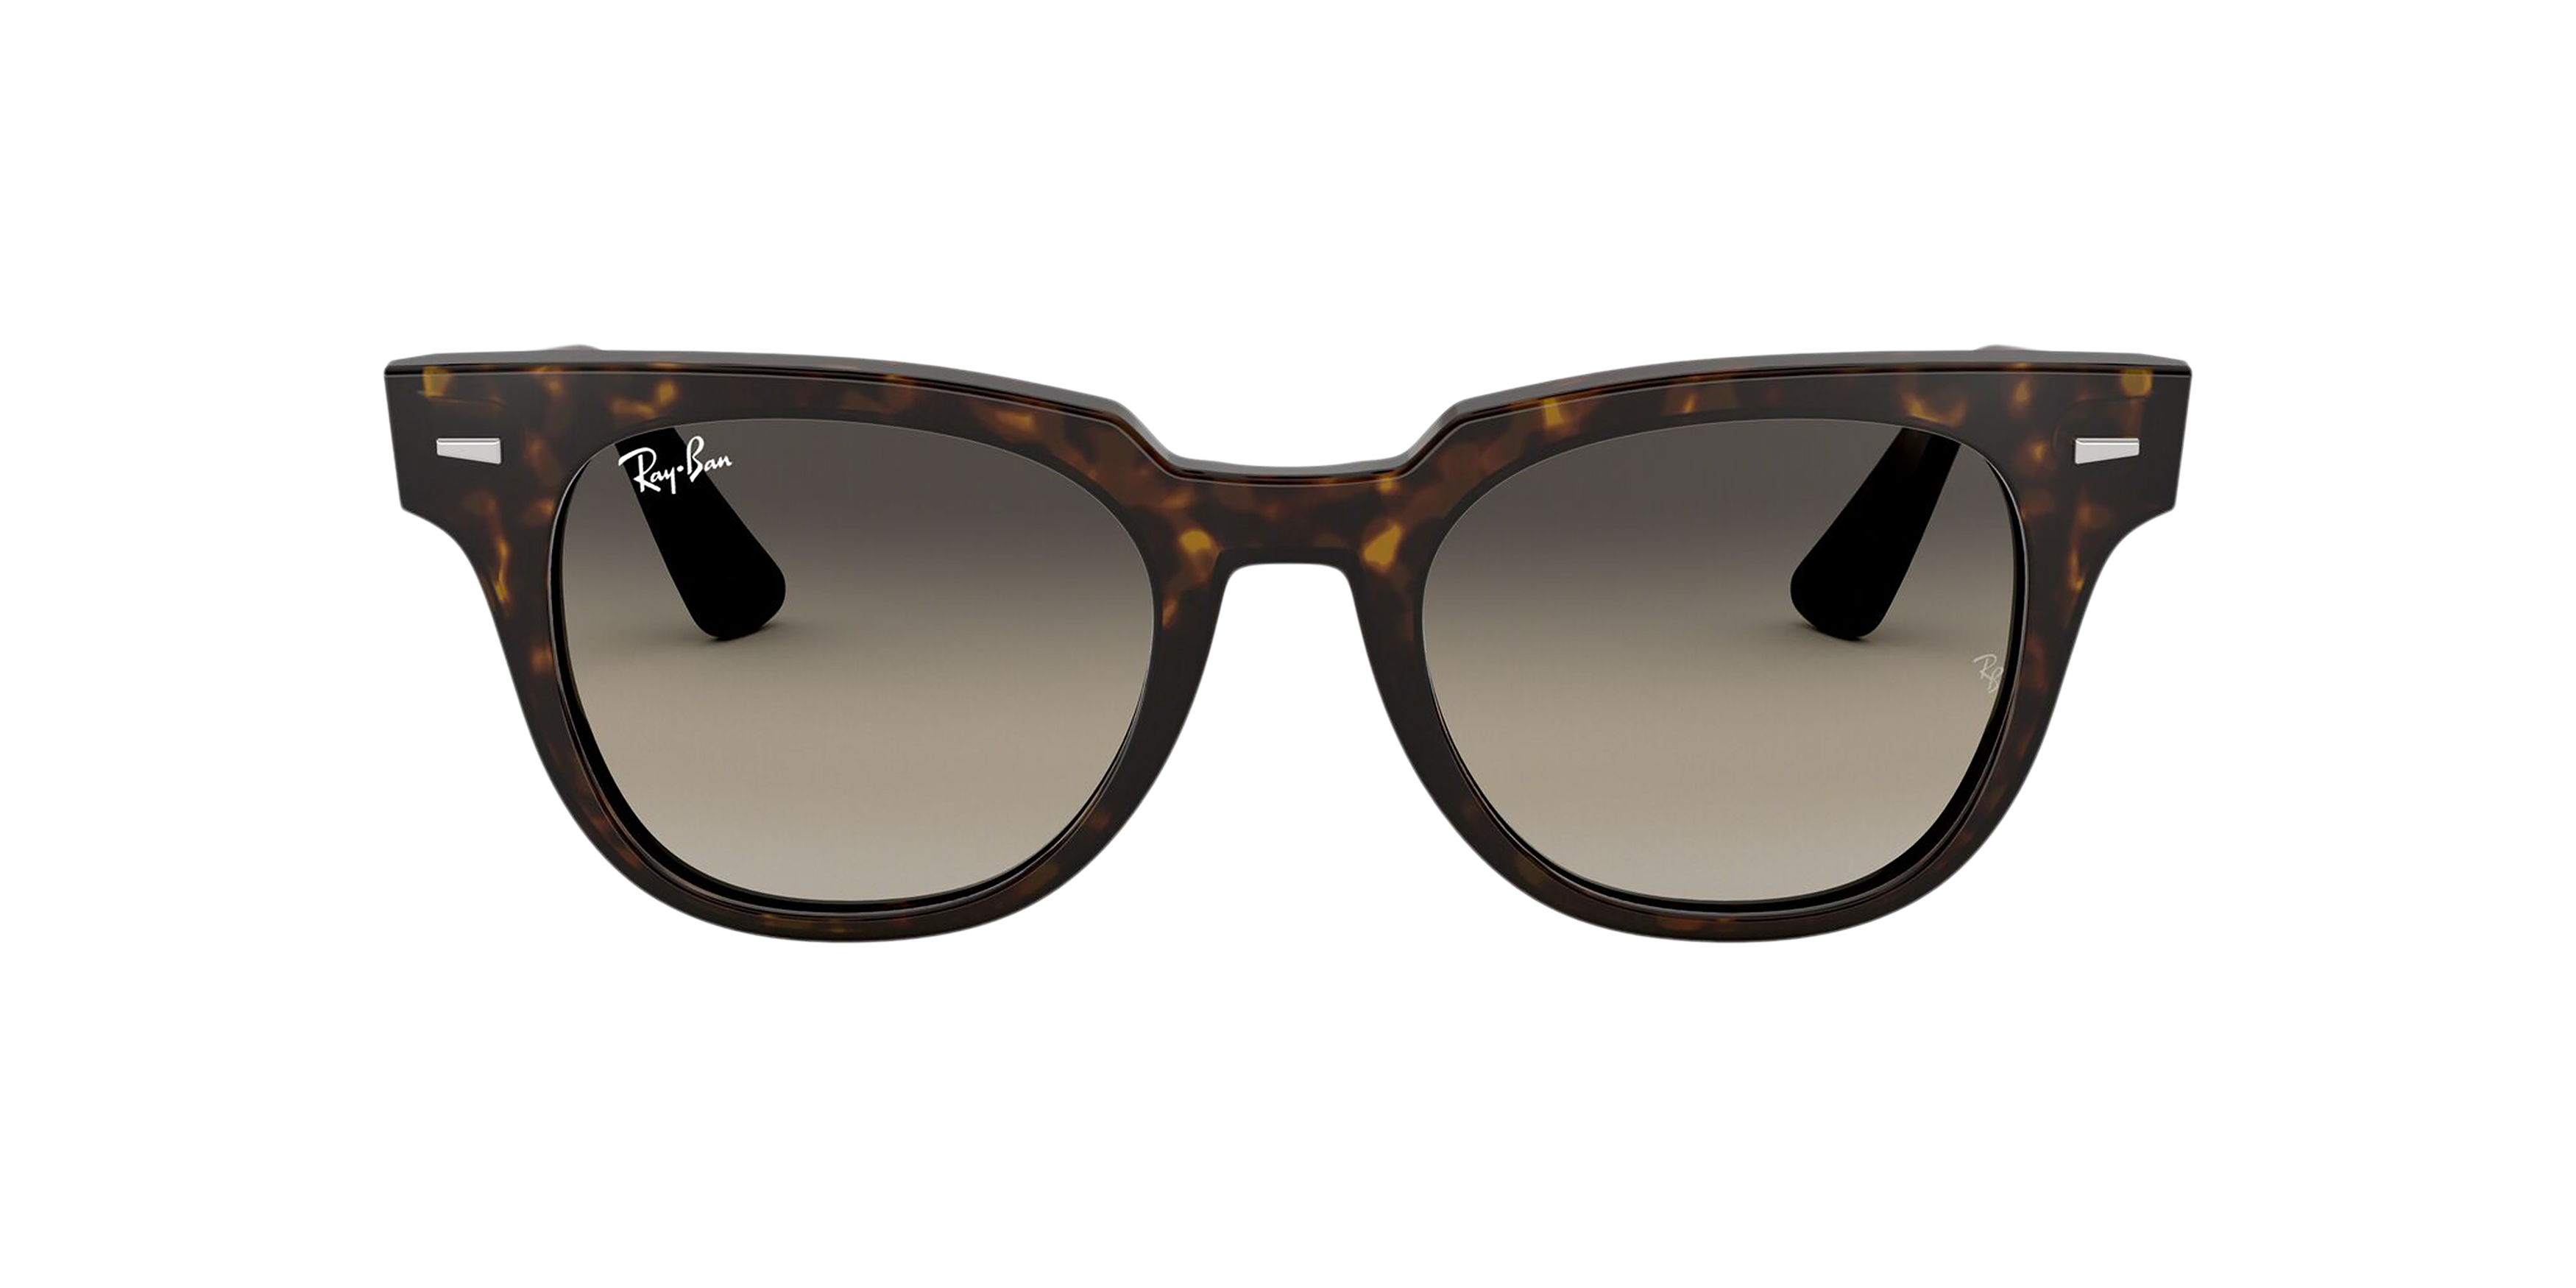 [products.image.front] Ray-Ban Meteor Classic RB2168 902/32